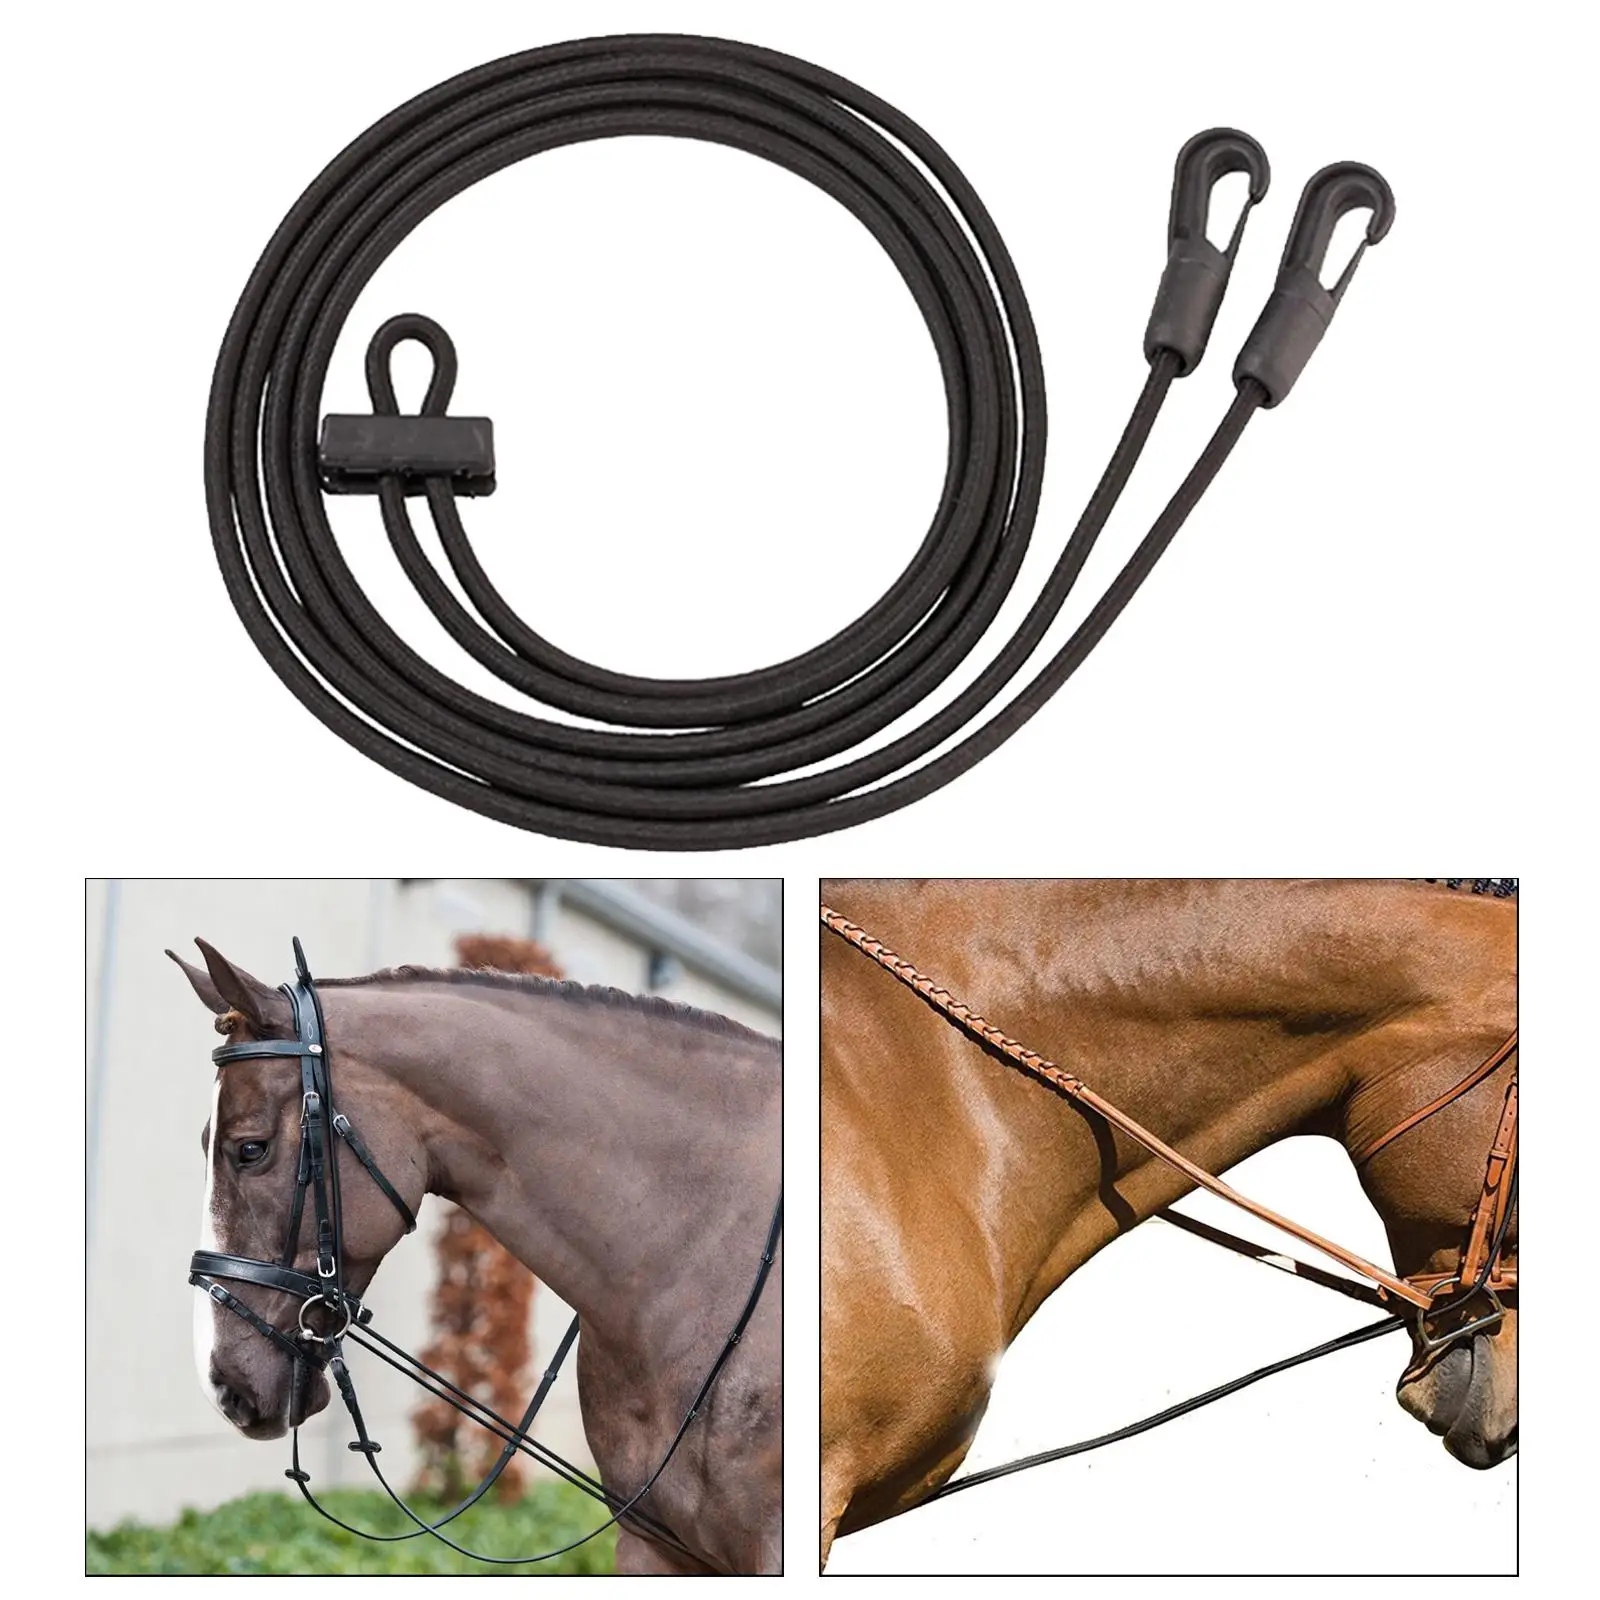 Pulling Training Rope Horse Reins for Care Grooming Horses Equipment Riding